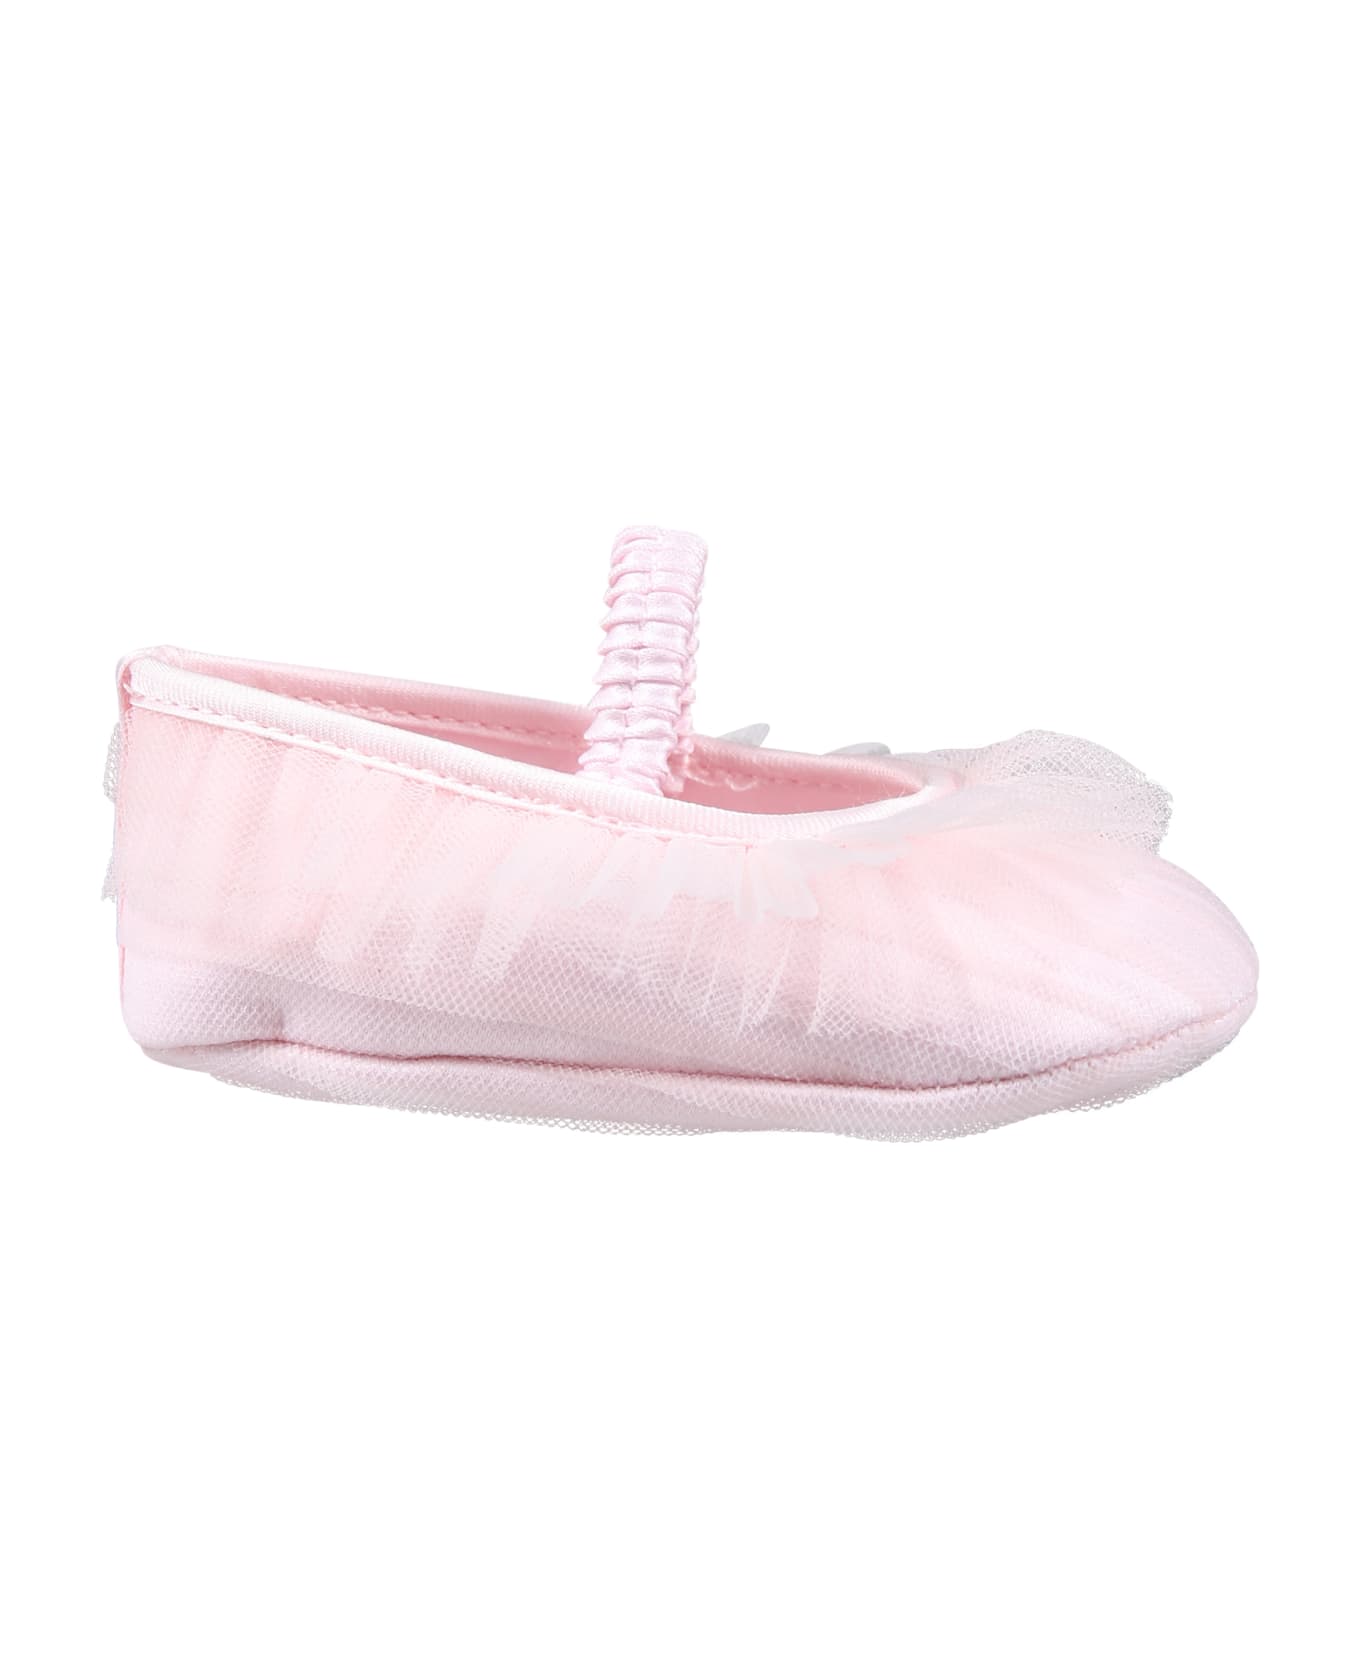 Monnalisa Pink Ballet Flats For Baby Girl With Tulle - Pink シューズ